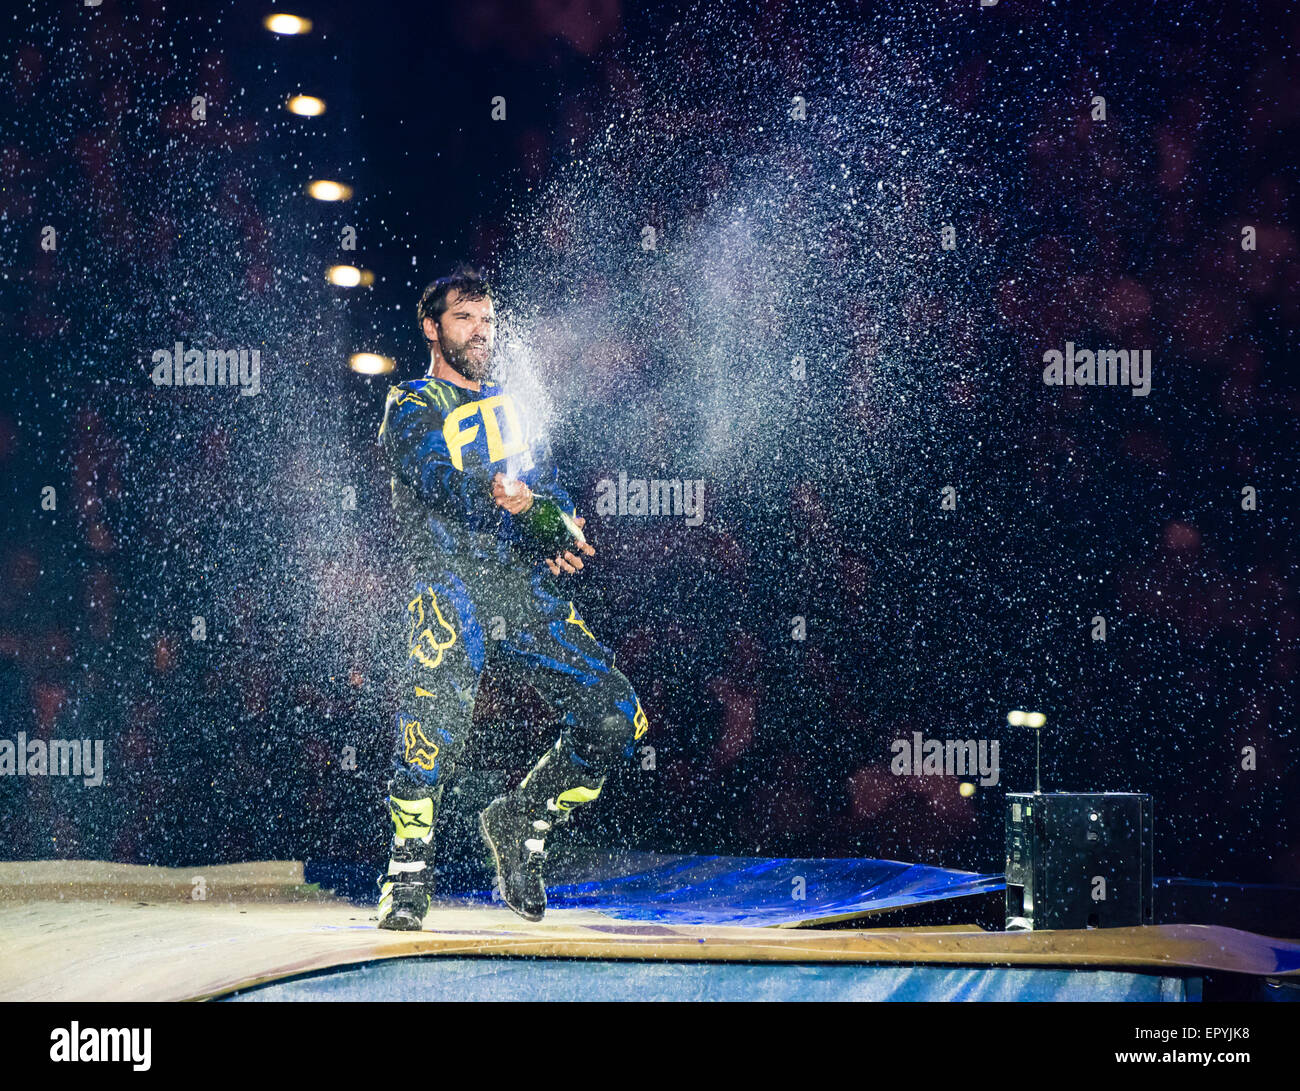 Zurich, Switzerland. 22nd May, 2015. FMX pro Edgar Torronteras sprays champagne after winning the audience voting for best FMX act at the 'Masters of Dirt' freestyle motocross show in Zurich. Credit:  Erik Tham/Alamy Live News Stock Photo